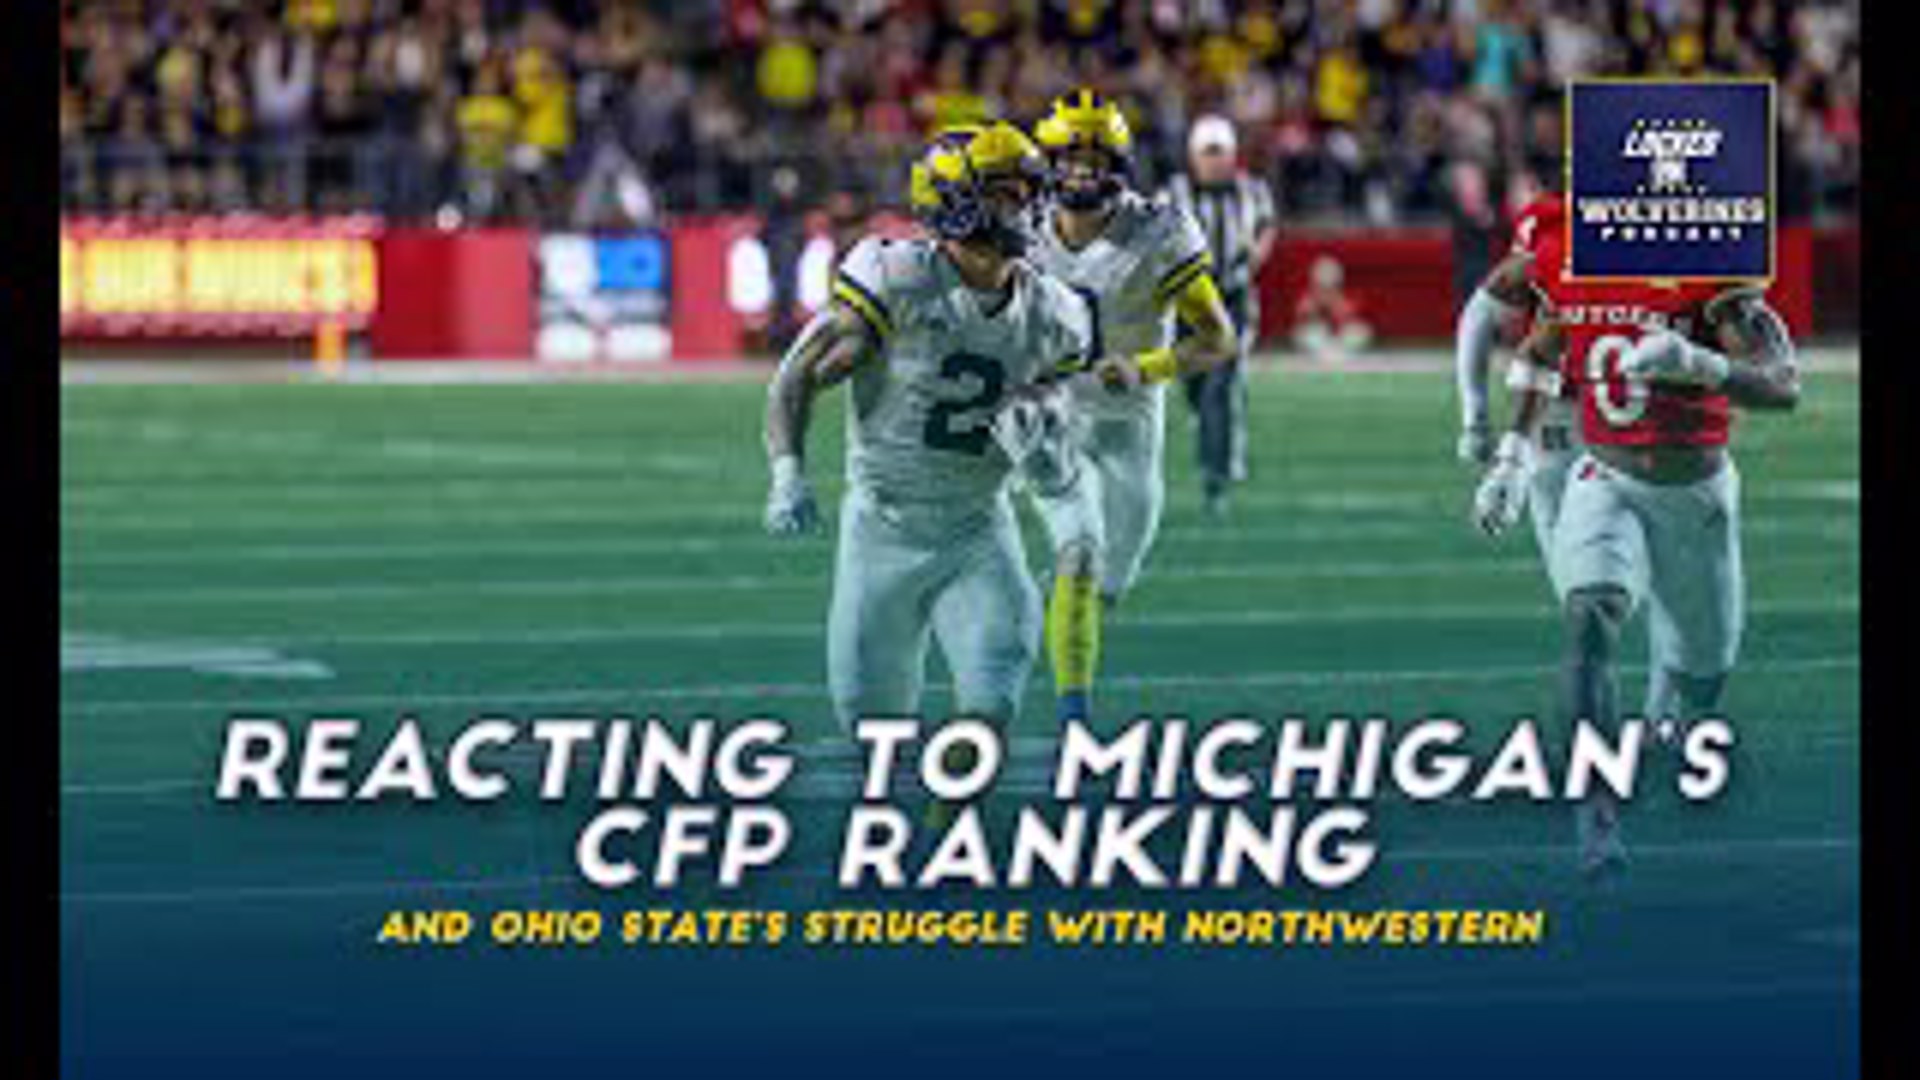 Locked On Wolverines reacts to the latest CFP rankings and where Michigan football stands, Ohio State's struggles with Northwestern and looking ahead to The Game.